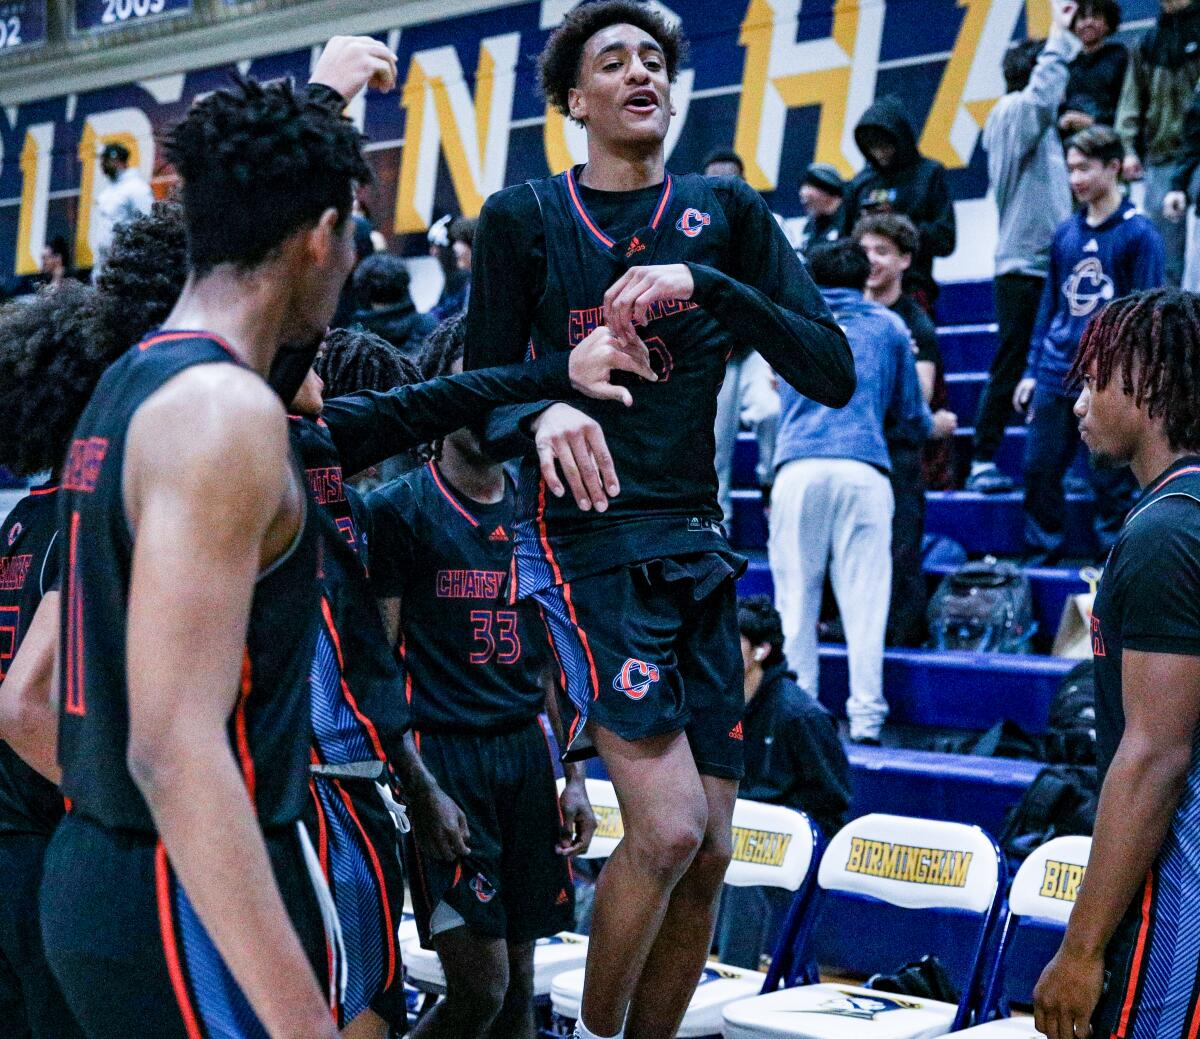 Alijah Arenas of Chatsworth celebrates after making a three-pointer with one second left in regulation.